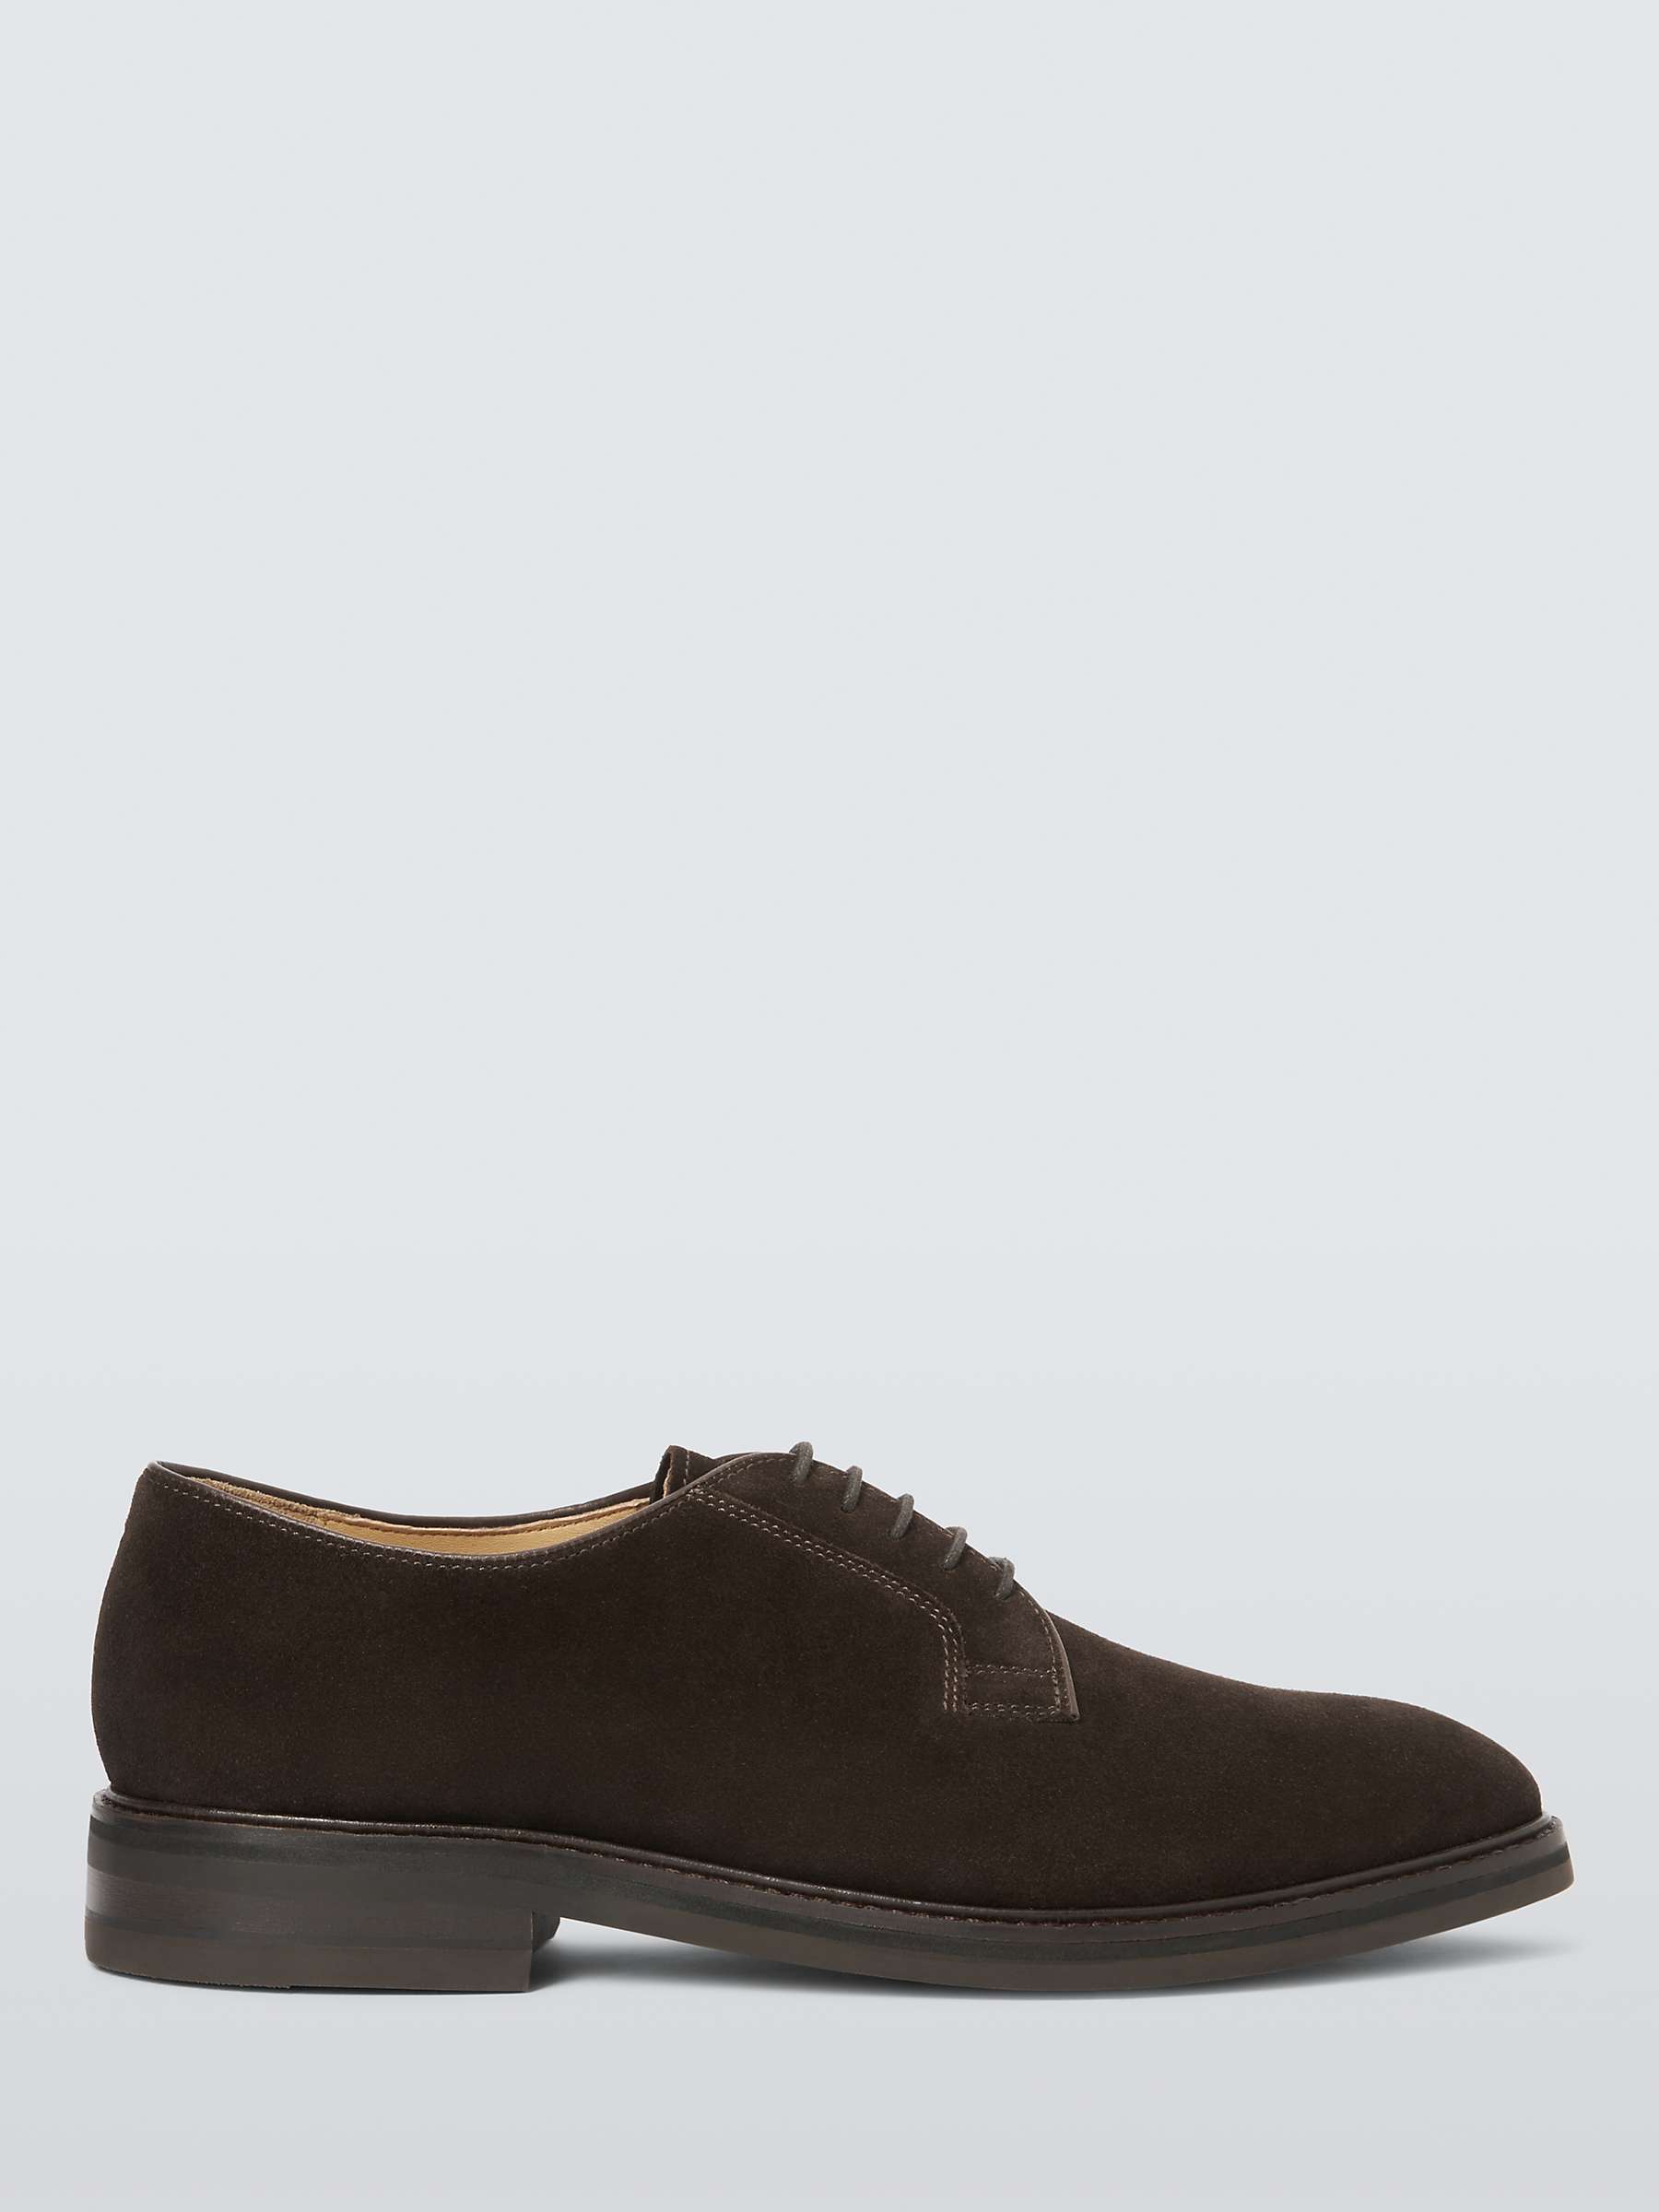 Buy John Lewis Suede Ivy Lace Up Shoes, Brown Online at johnlewis.com